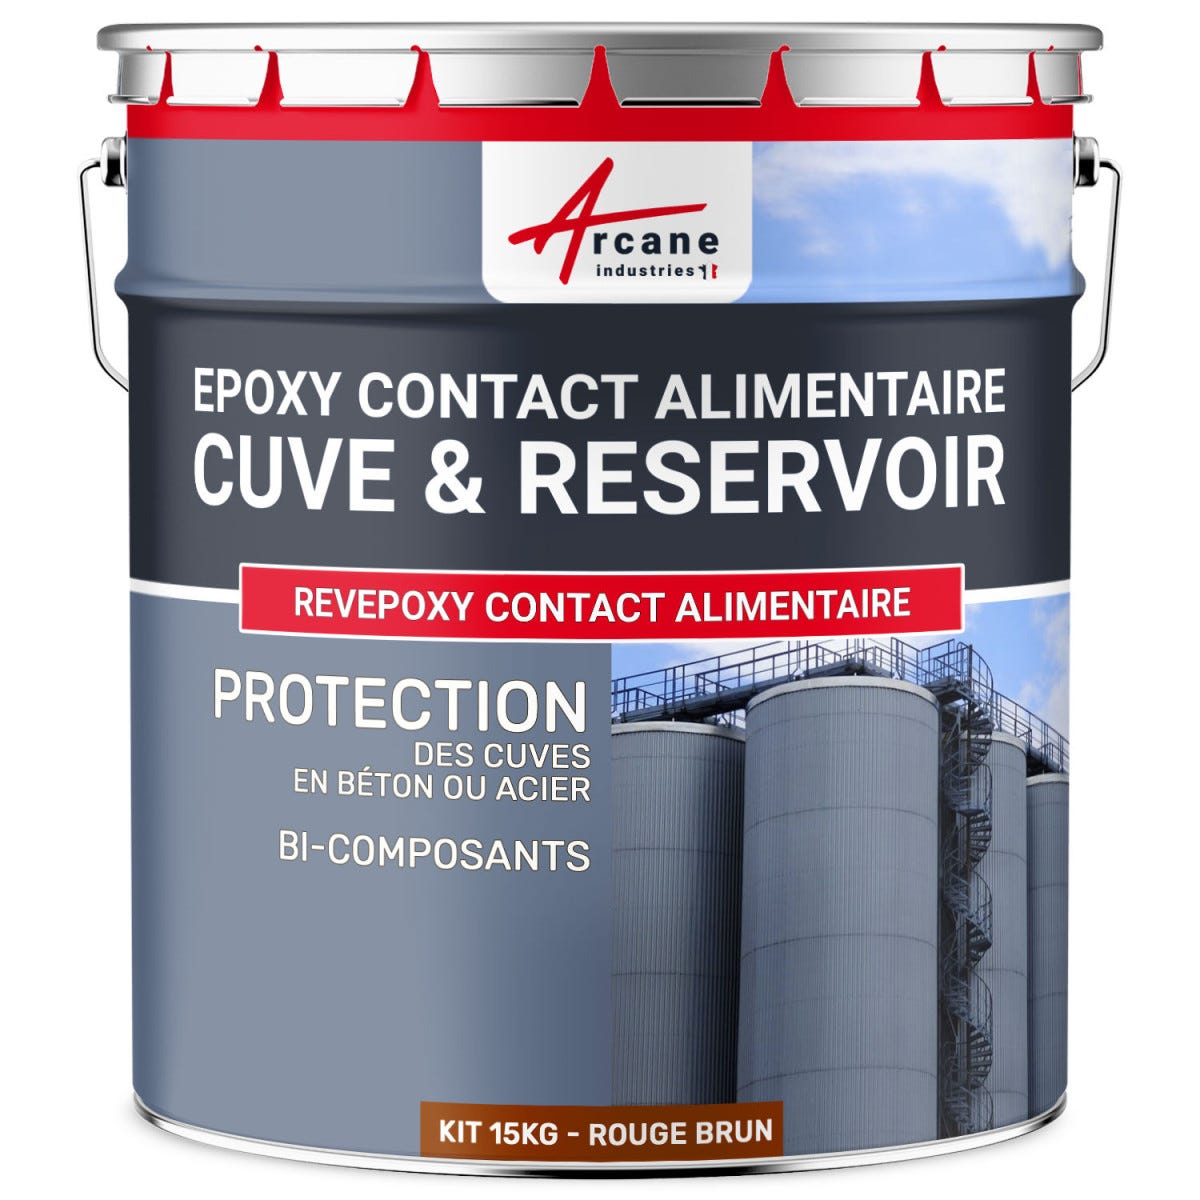 Resine Epoxy pour CONTACT ALIMENTAIRE - REVEPOXY CONTACT ALIMENTAIRE - 15 kg - Rouge Brun - Ral 3011 - ARCANE INDUSTRIES 0